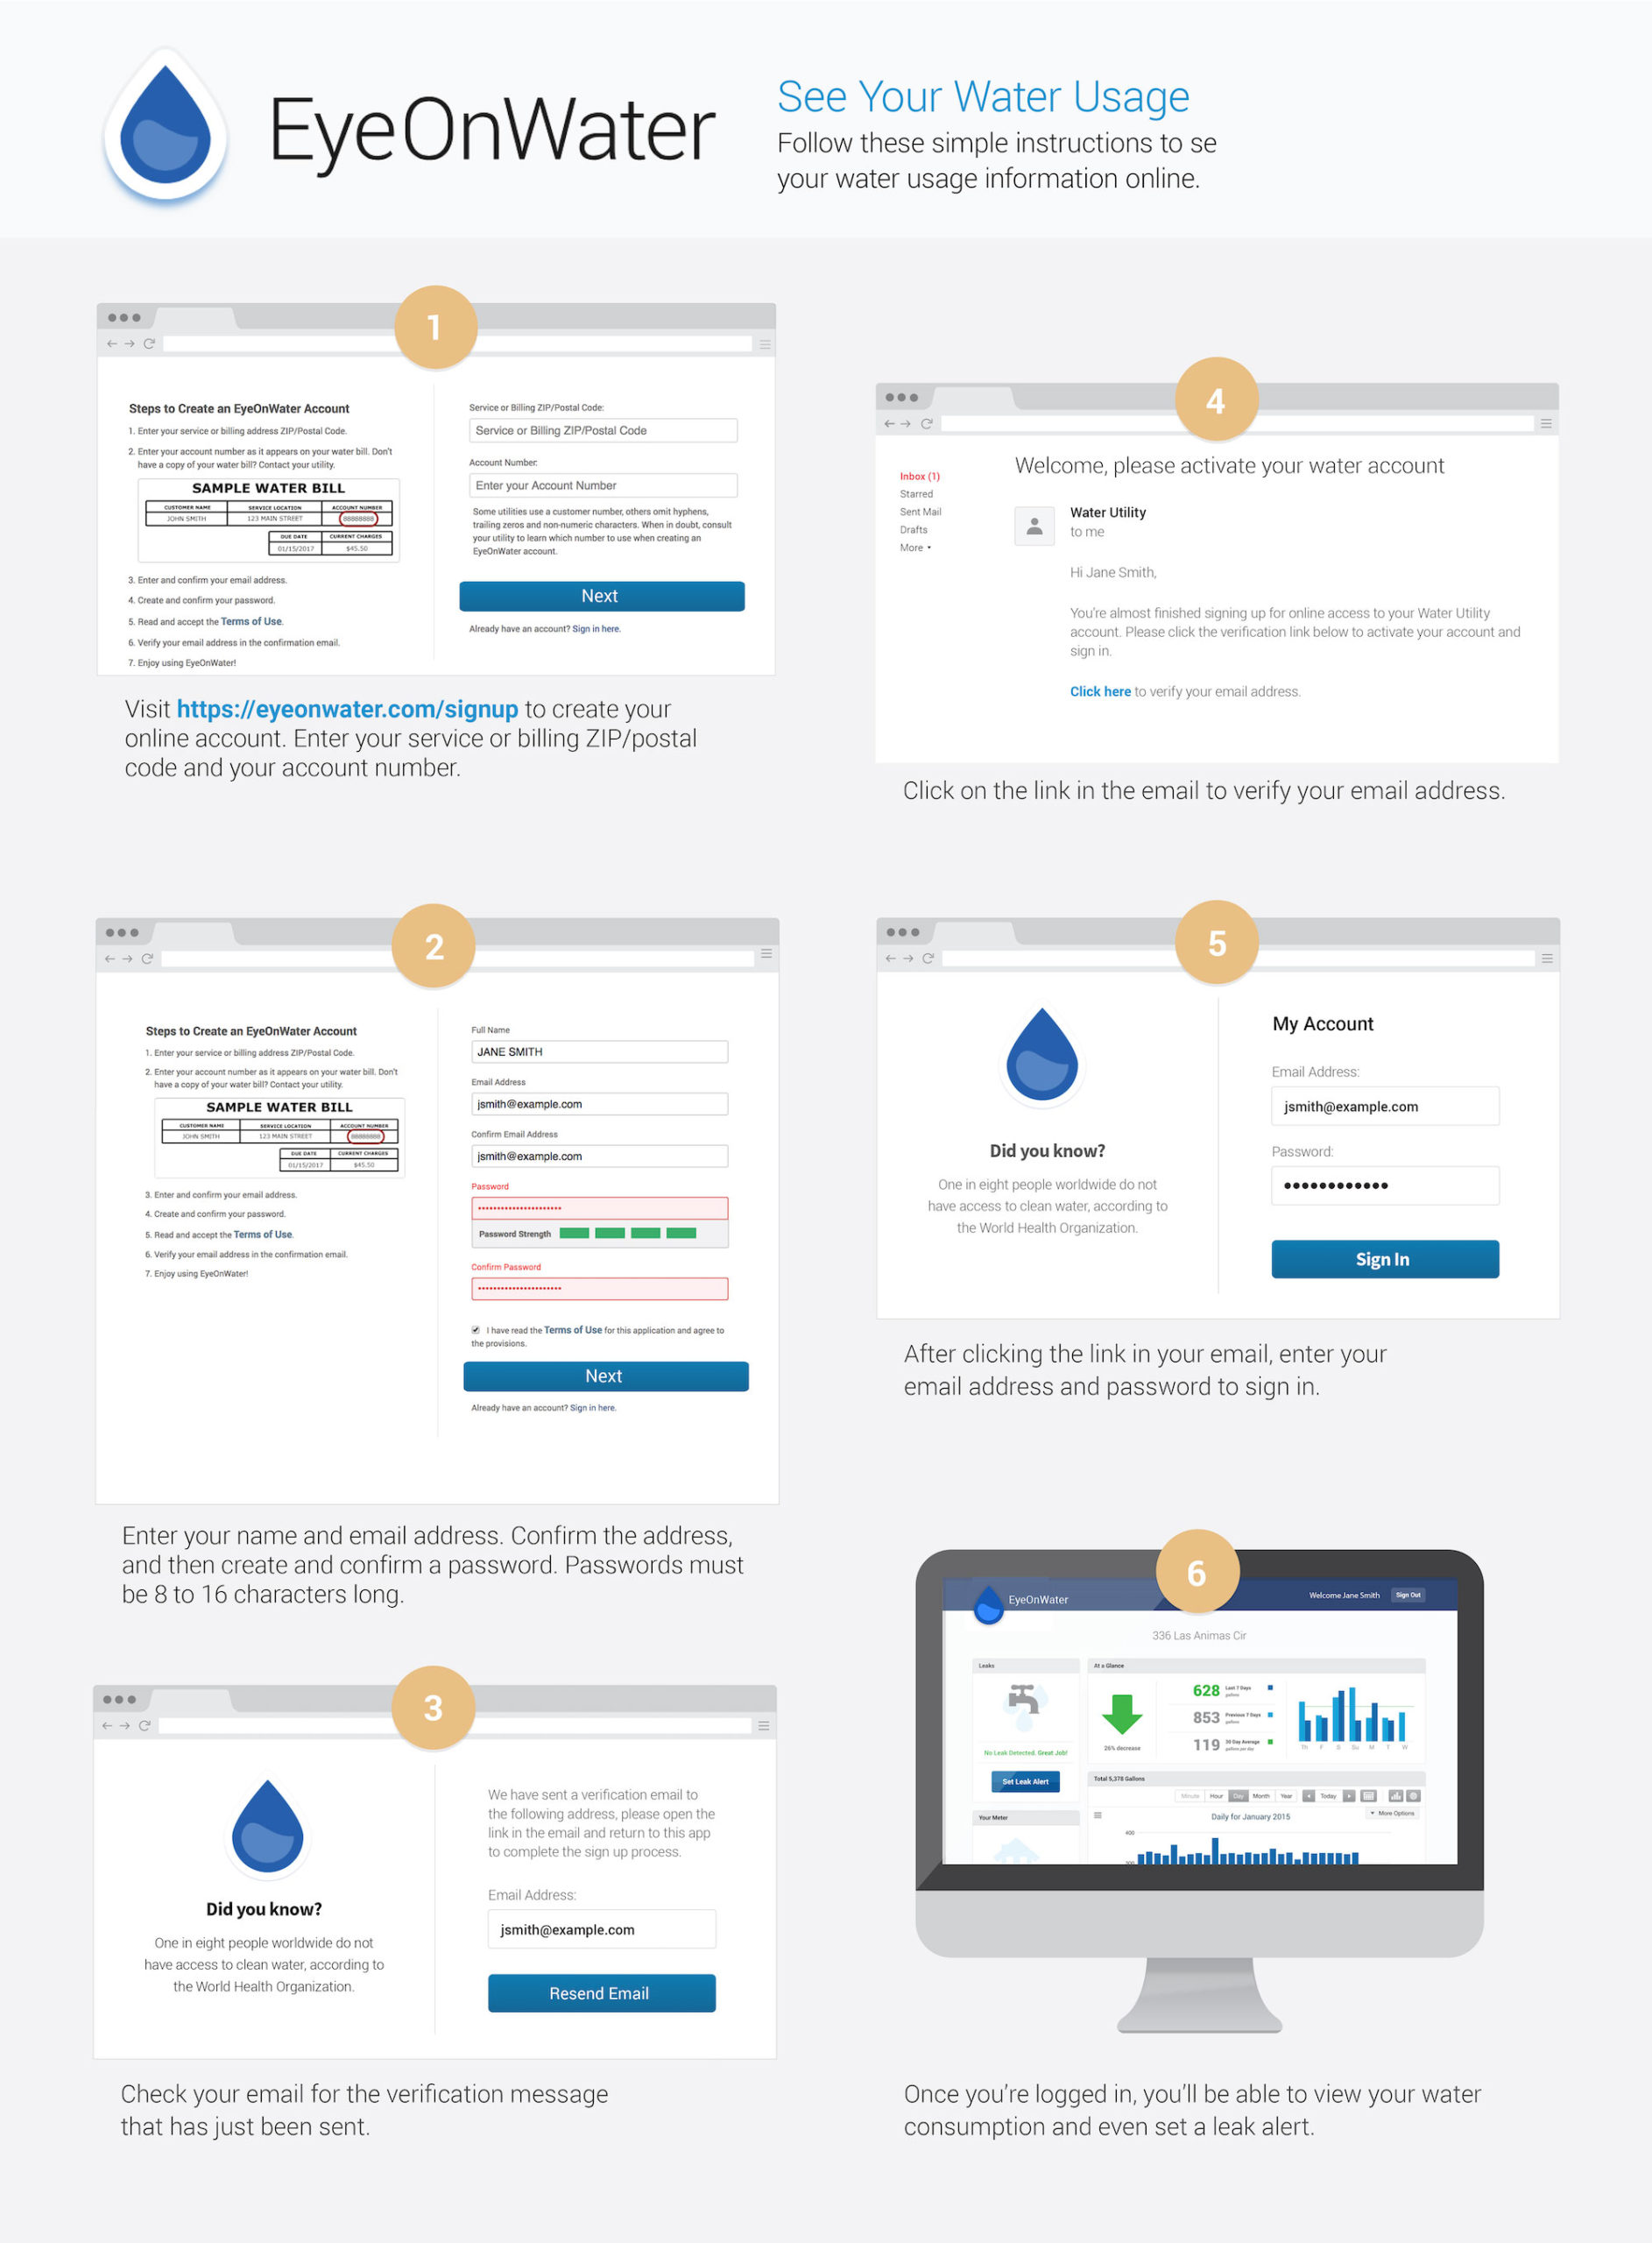 EyeOnWater graphic showing how to log in and create account